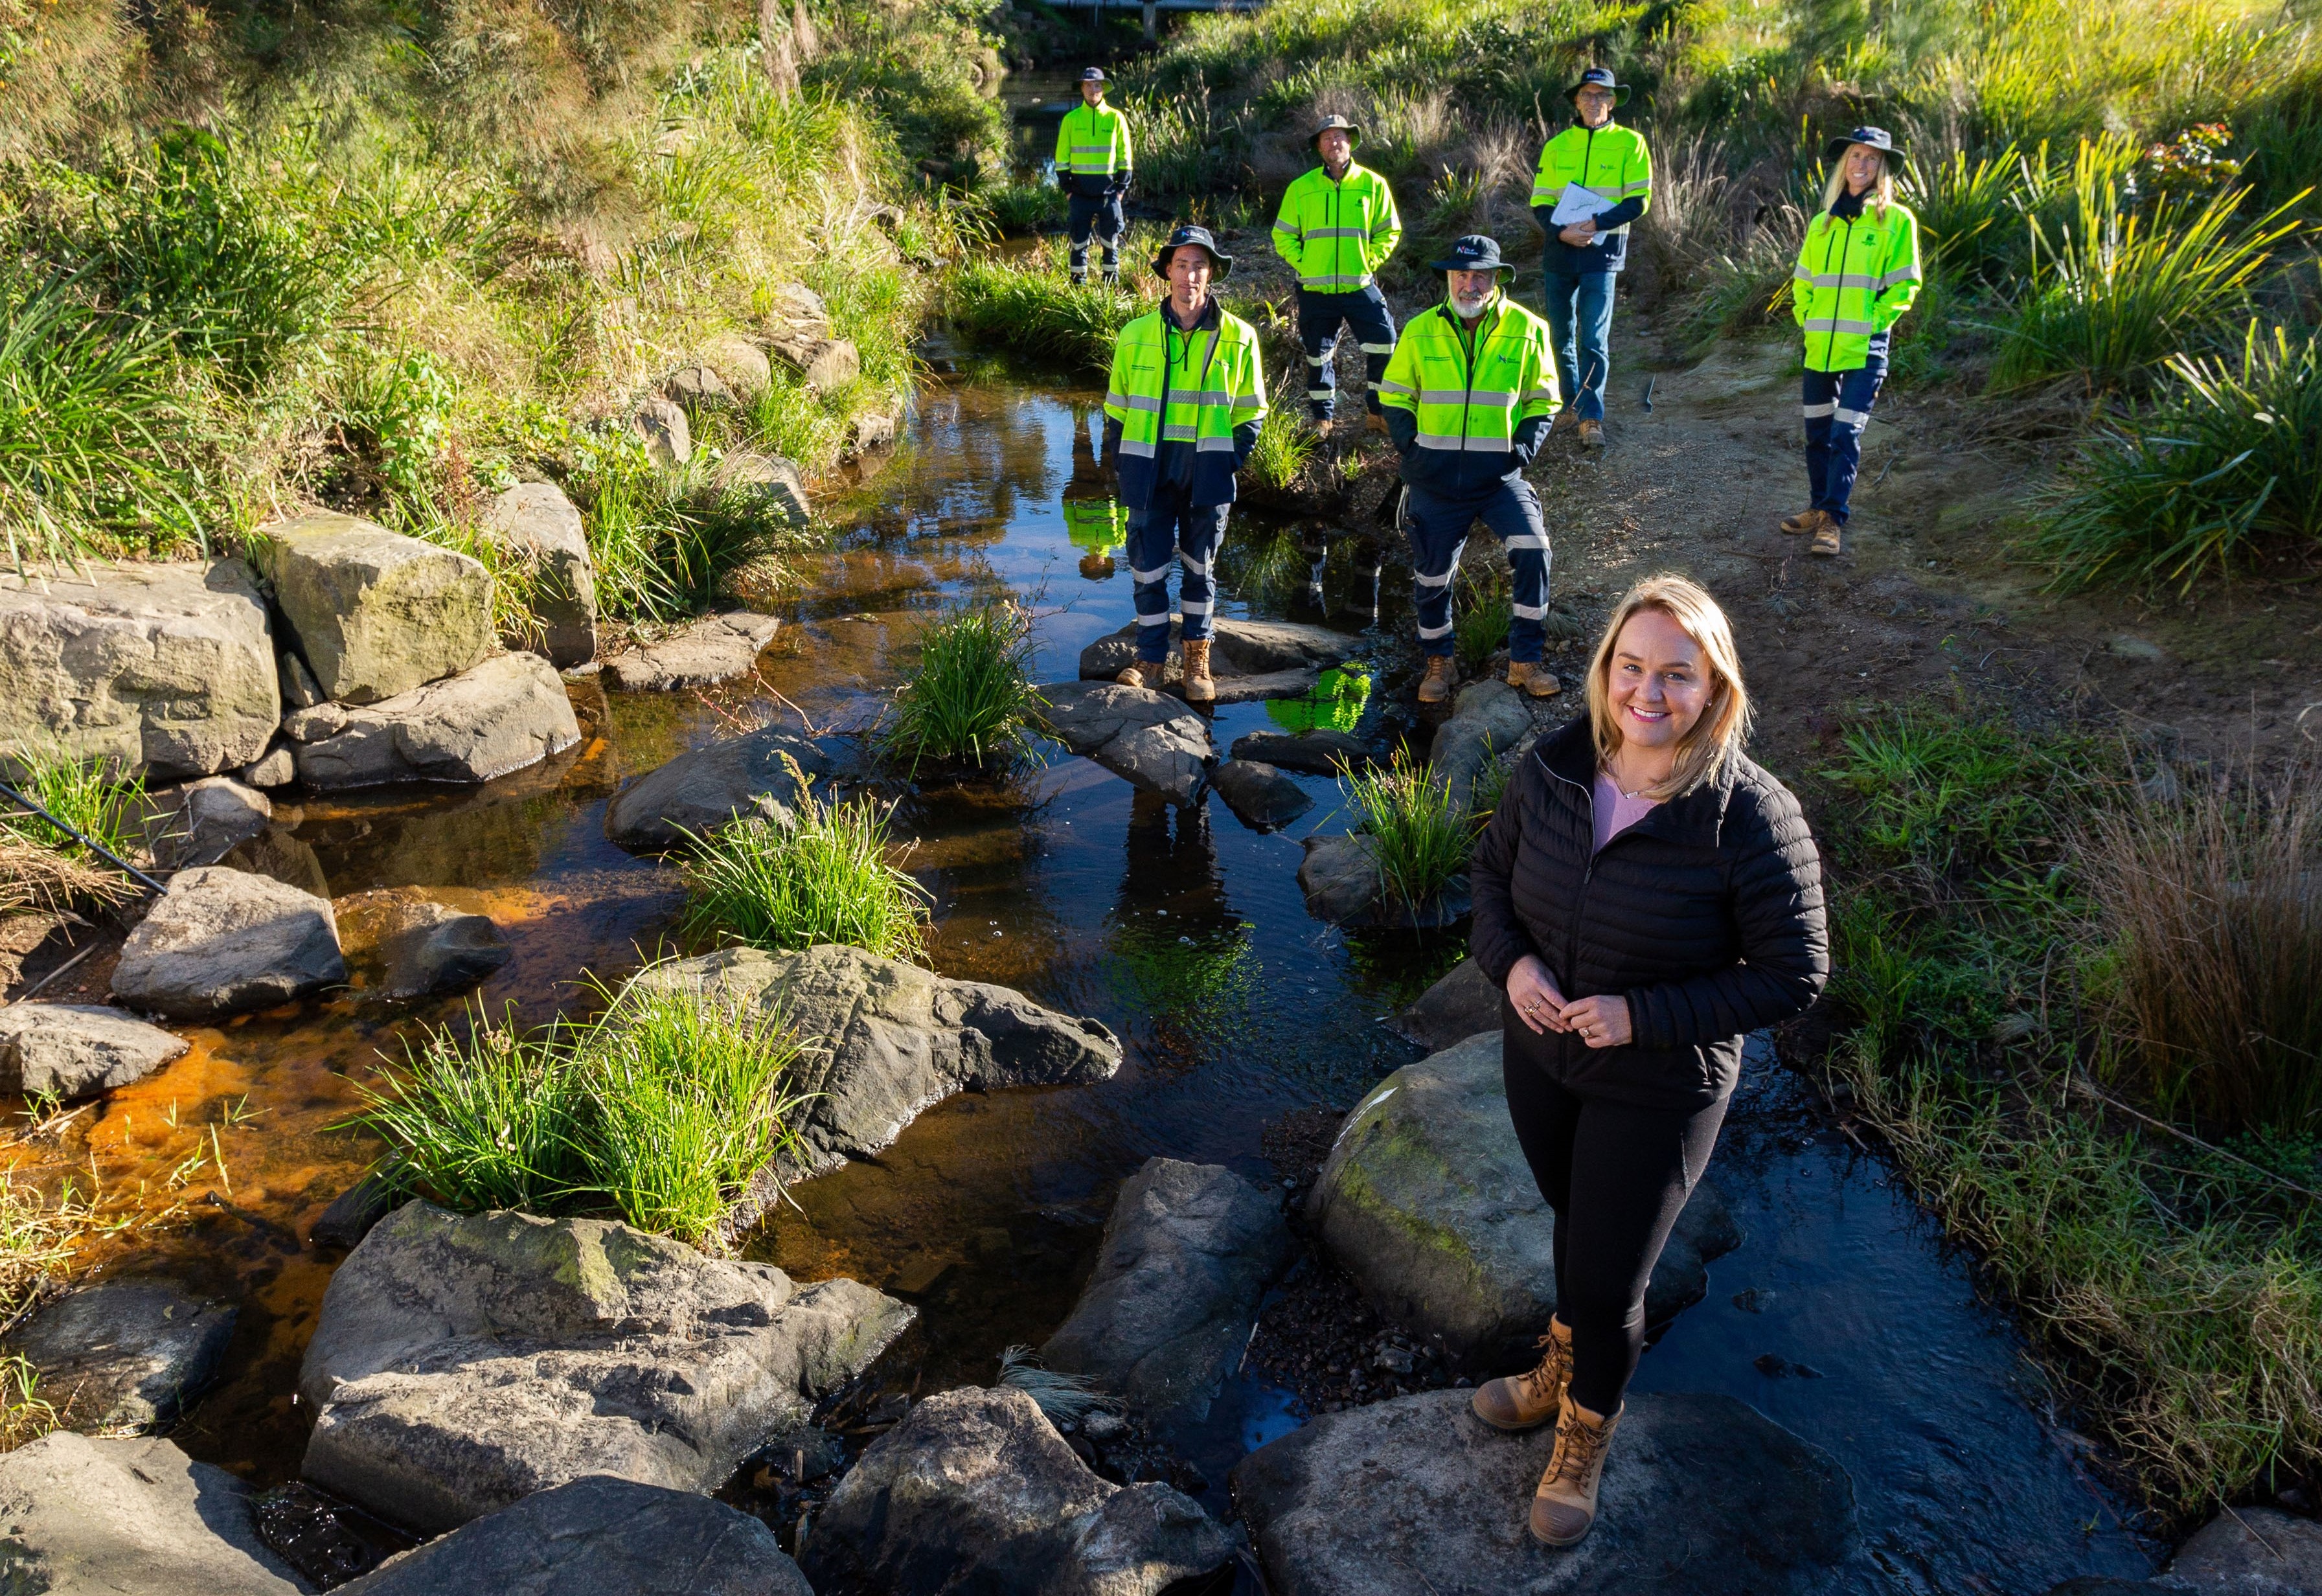 Lord-Mayor-Nuatali-Nelmes-with-City-of-Newcastle-staff-at-a-previously-rehabilitated-section-of-Ironbark-Creek.jpg